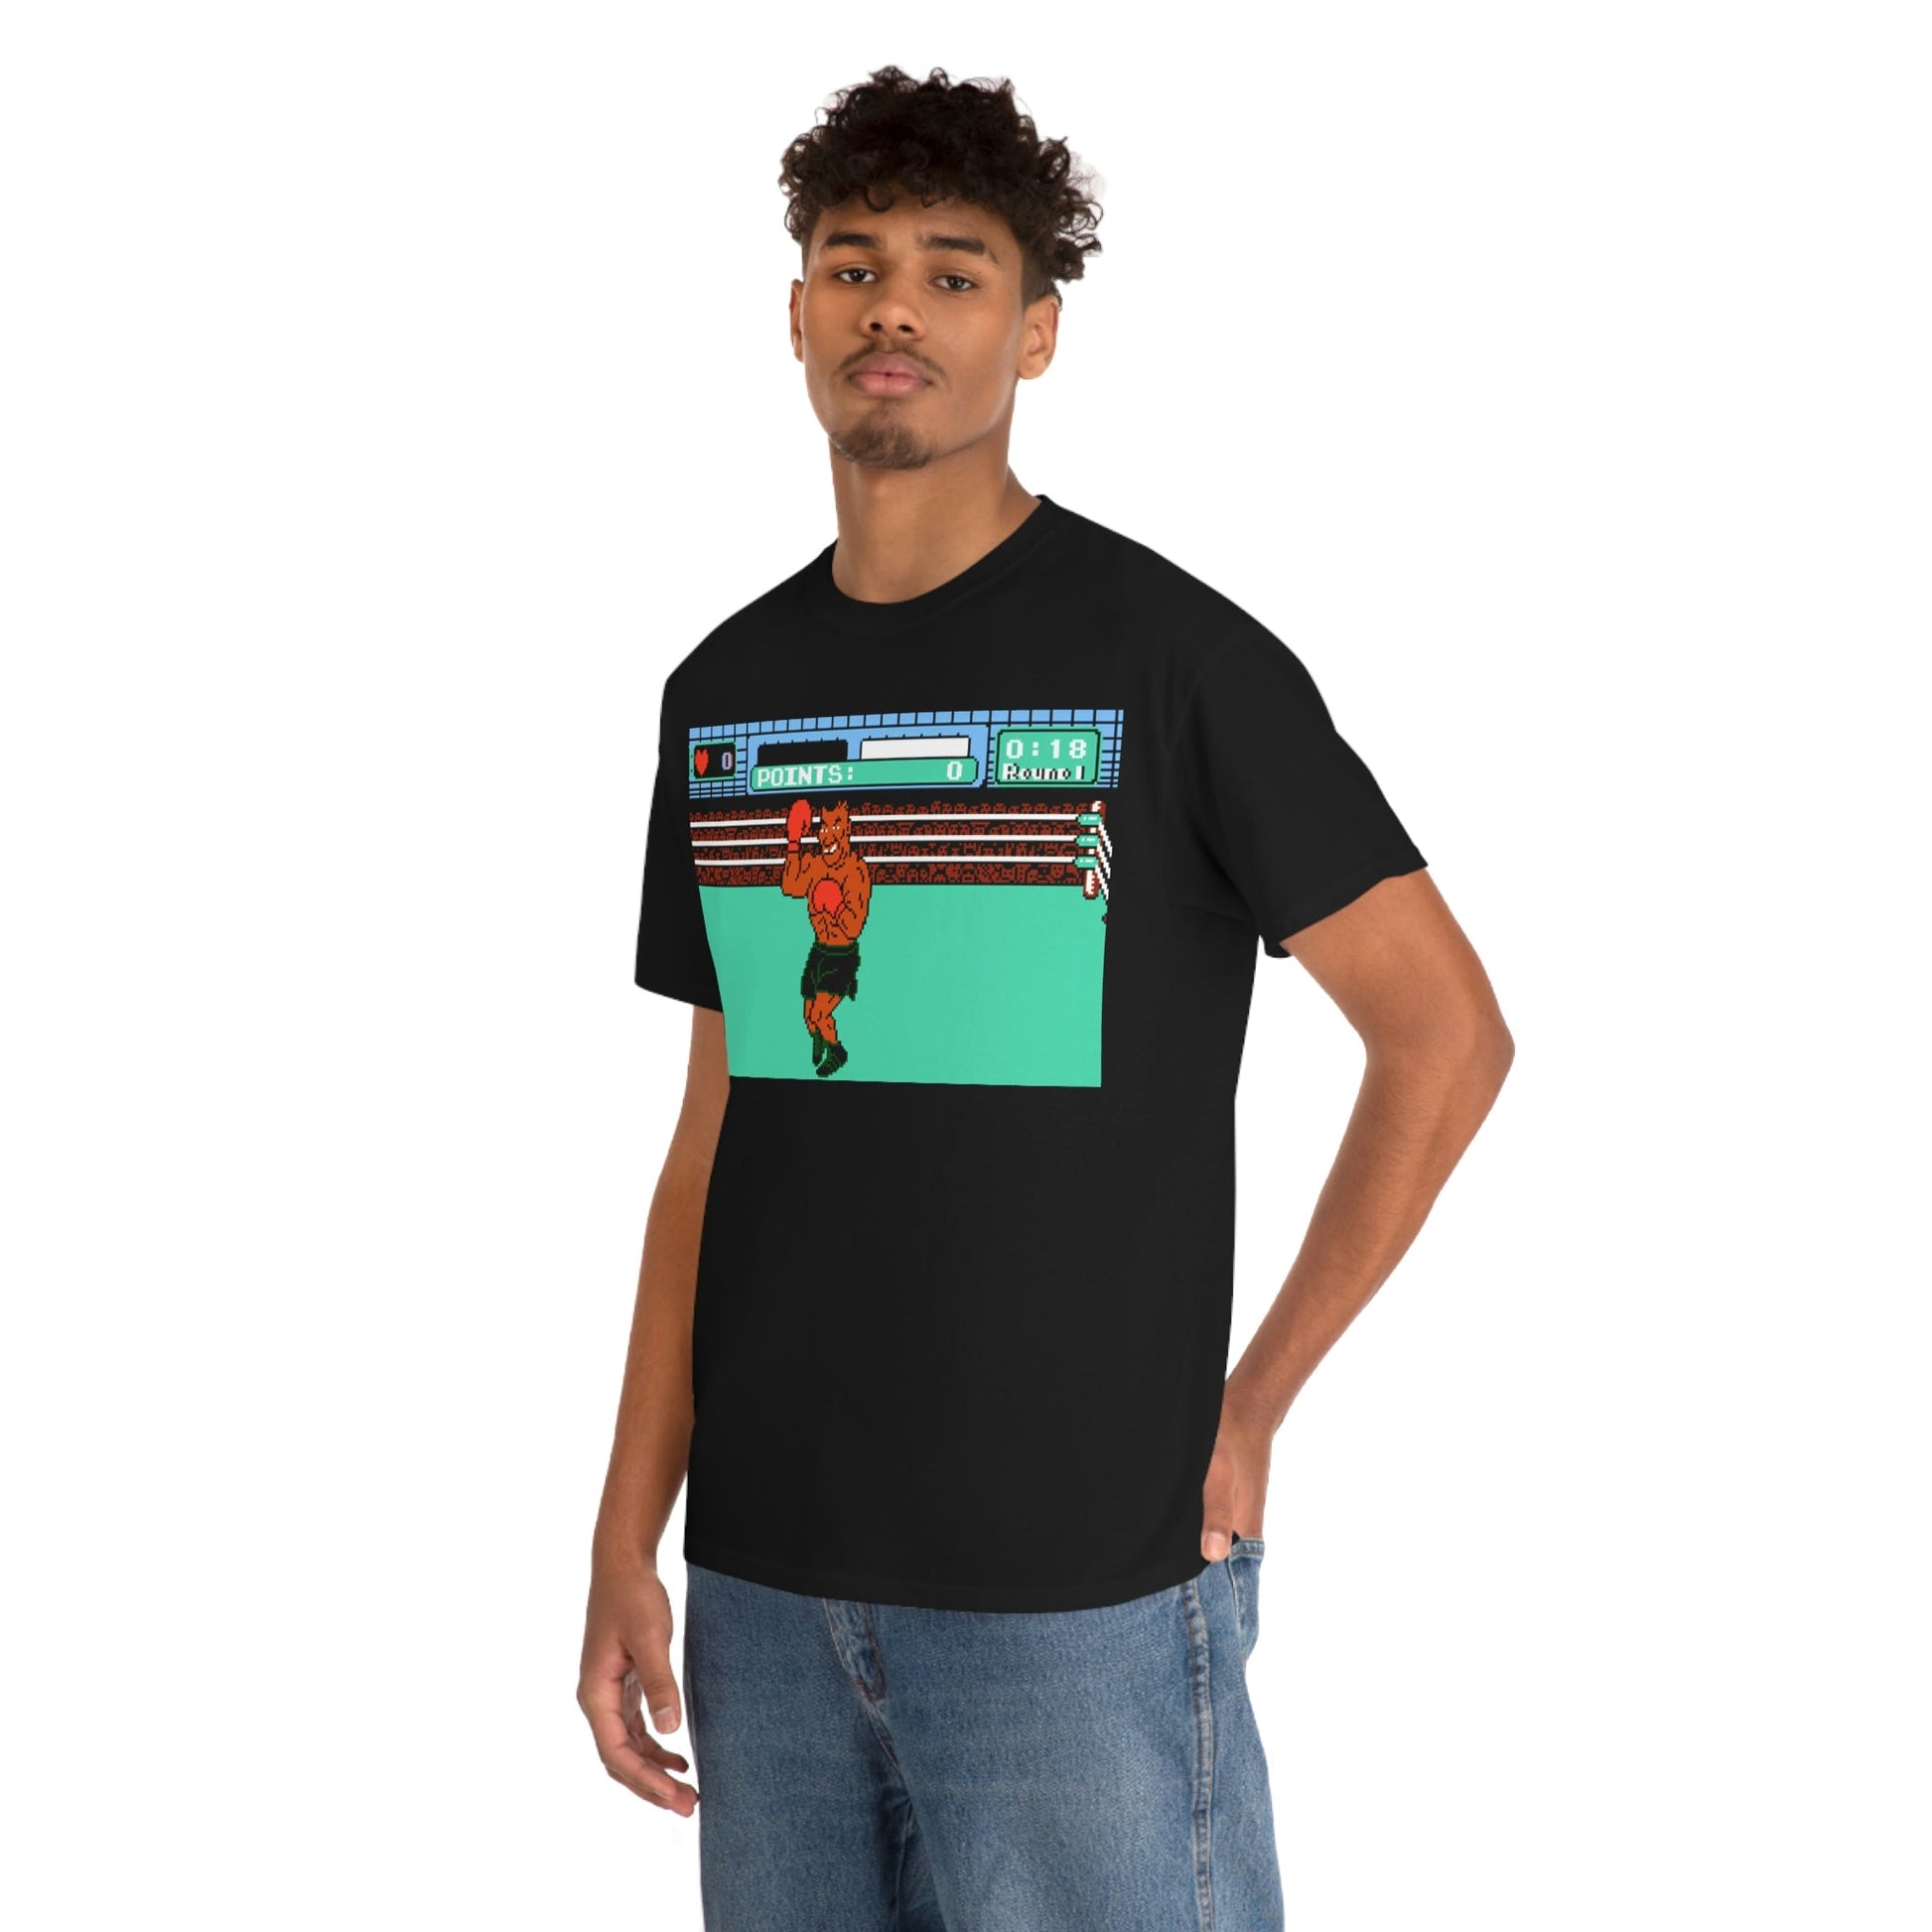 Mike Tyson's Punch-out T-Shirt - RetroTeeShop